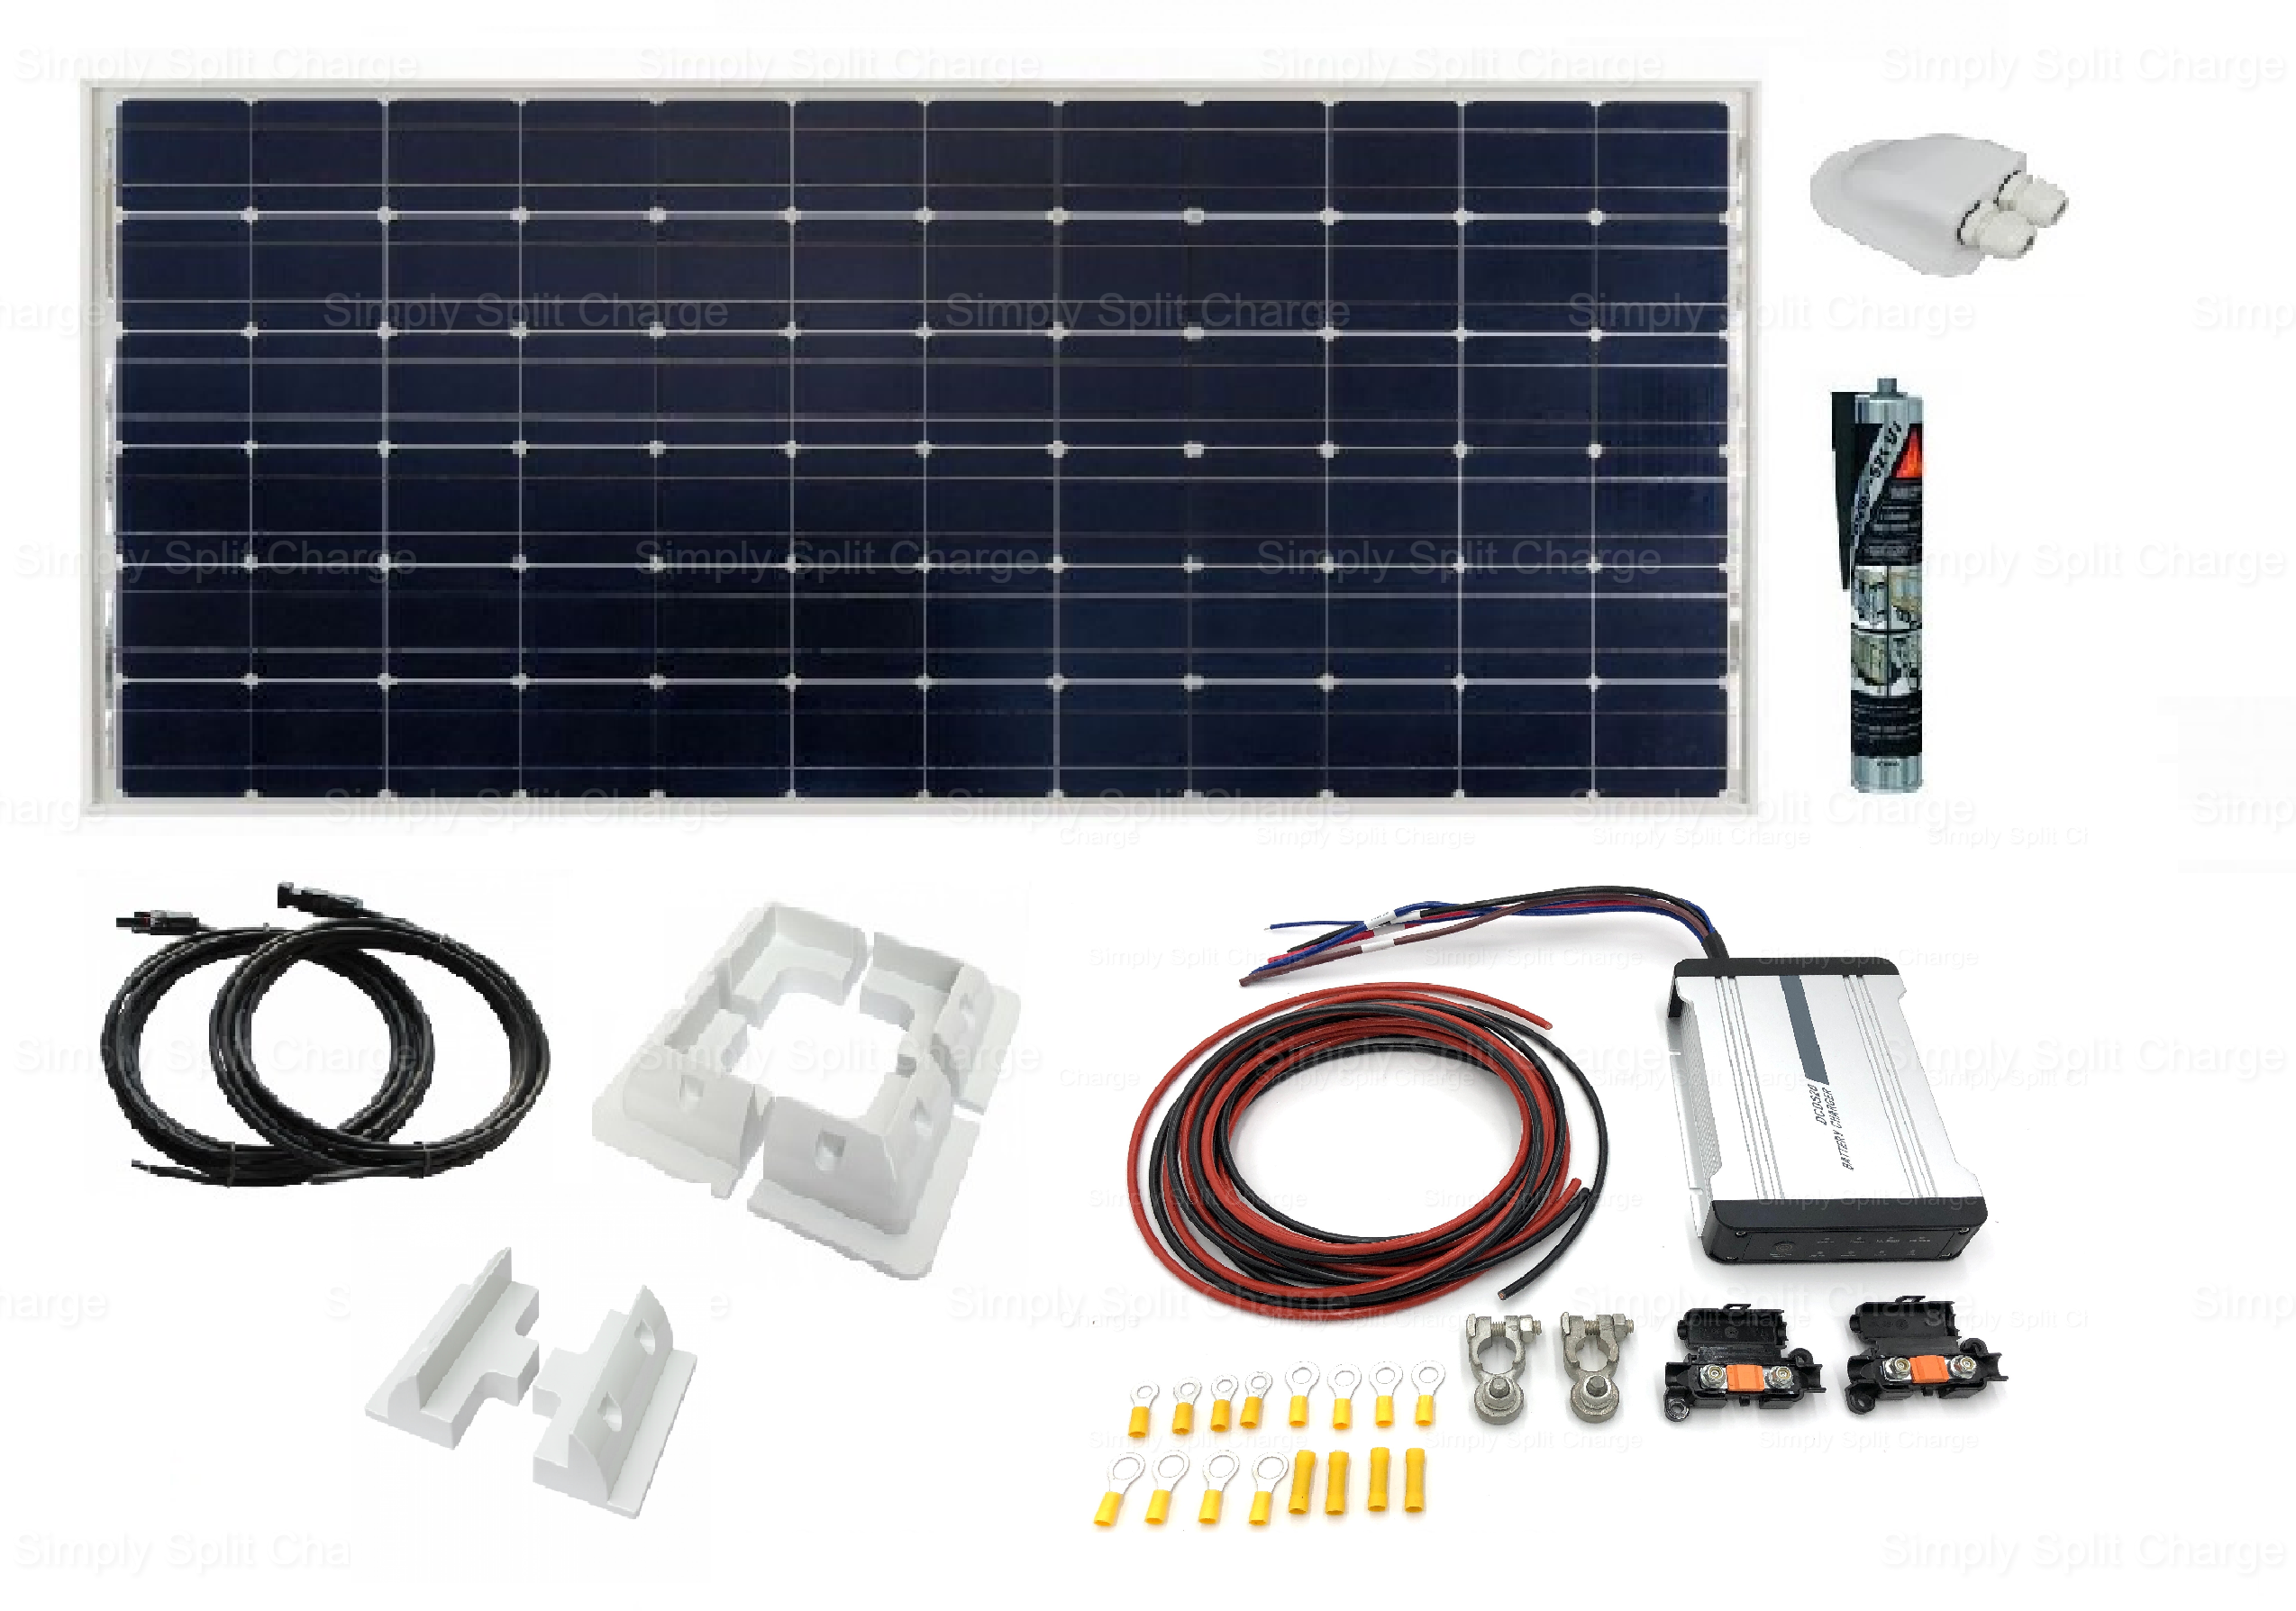 DCDS20 12v 20a B2B Charger - 175w Victron Solar Panel Kit